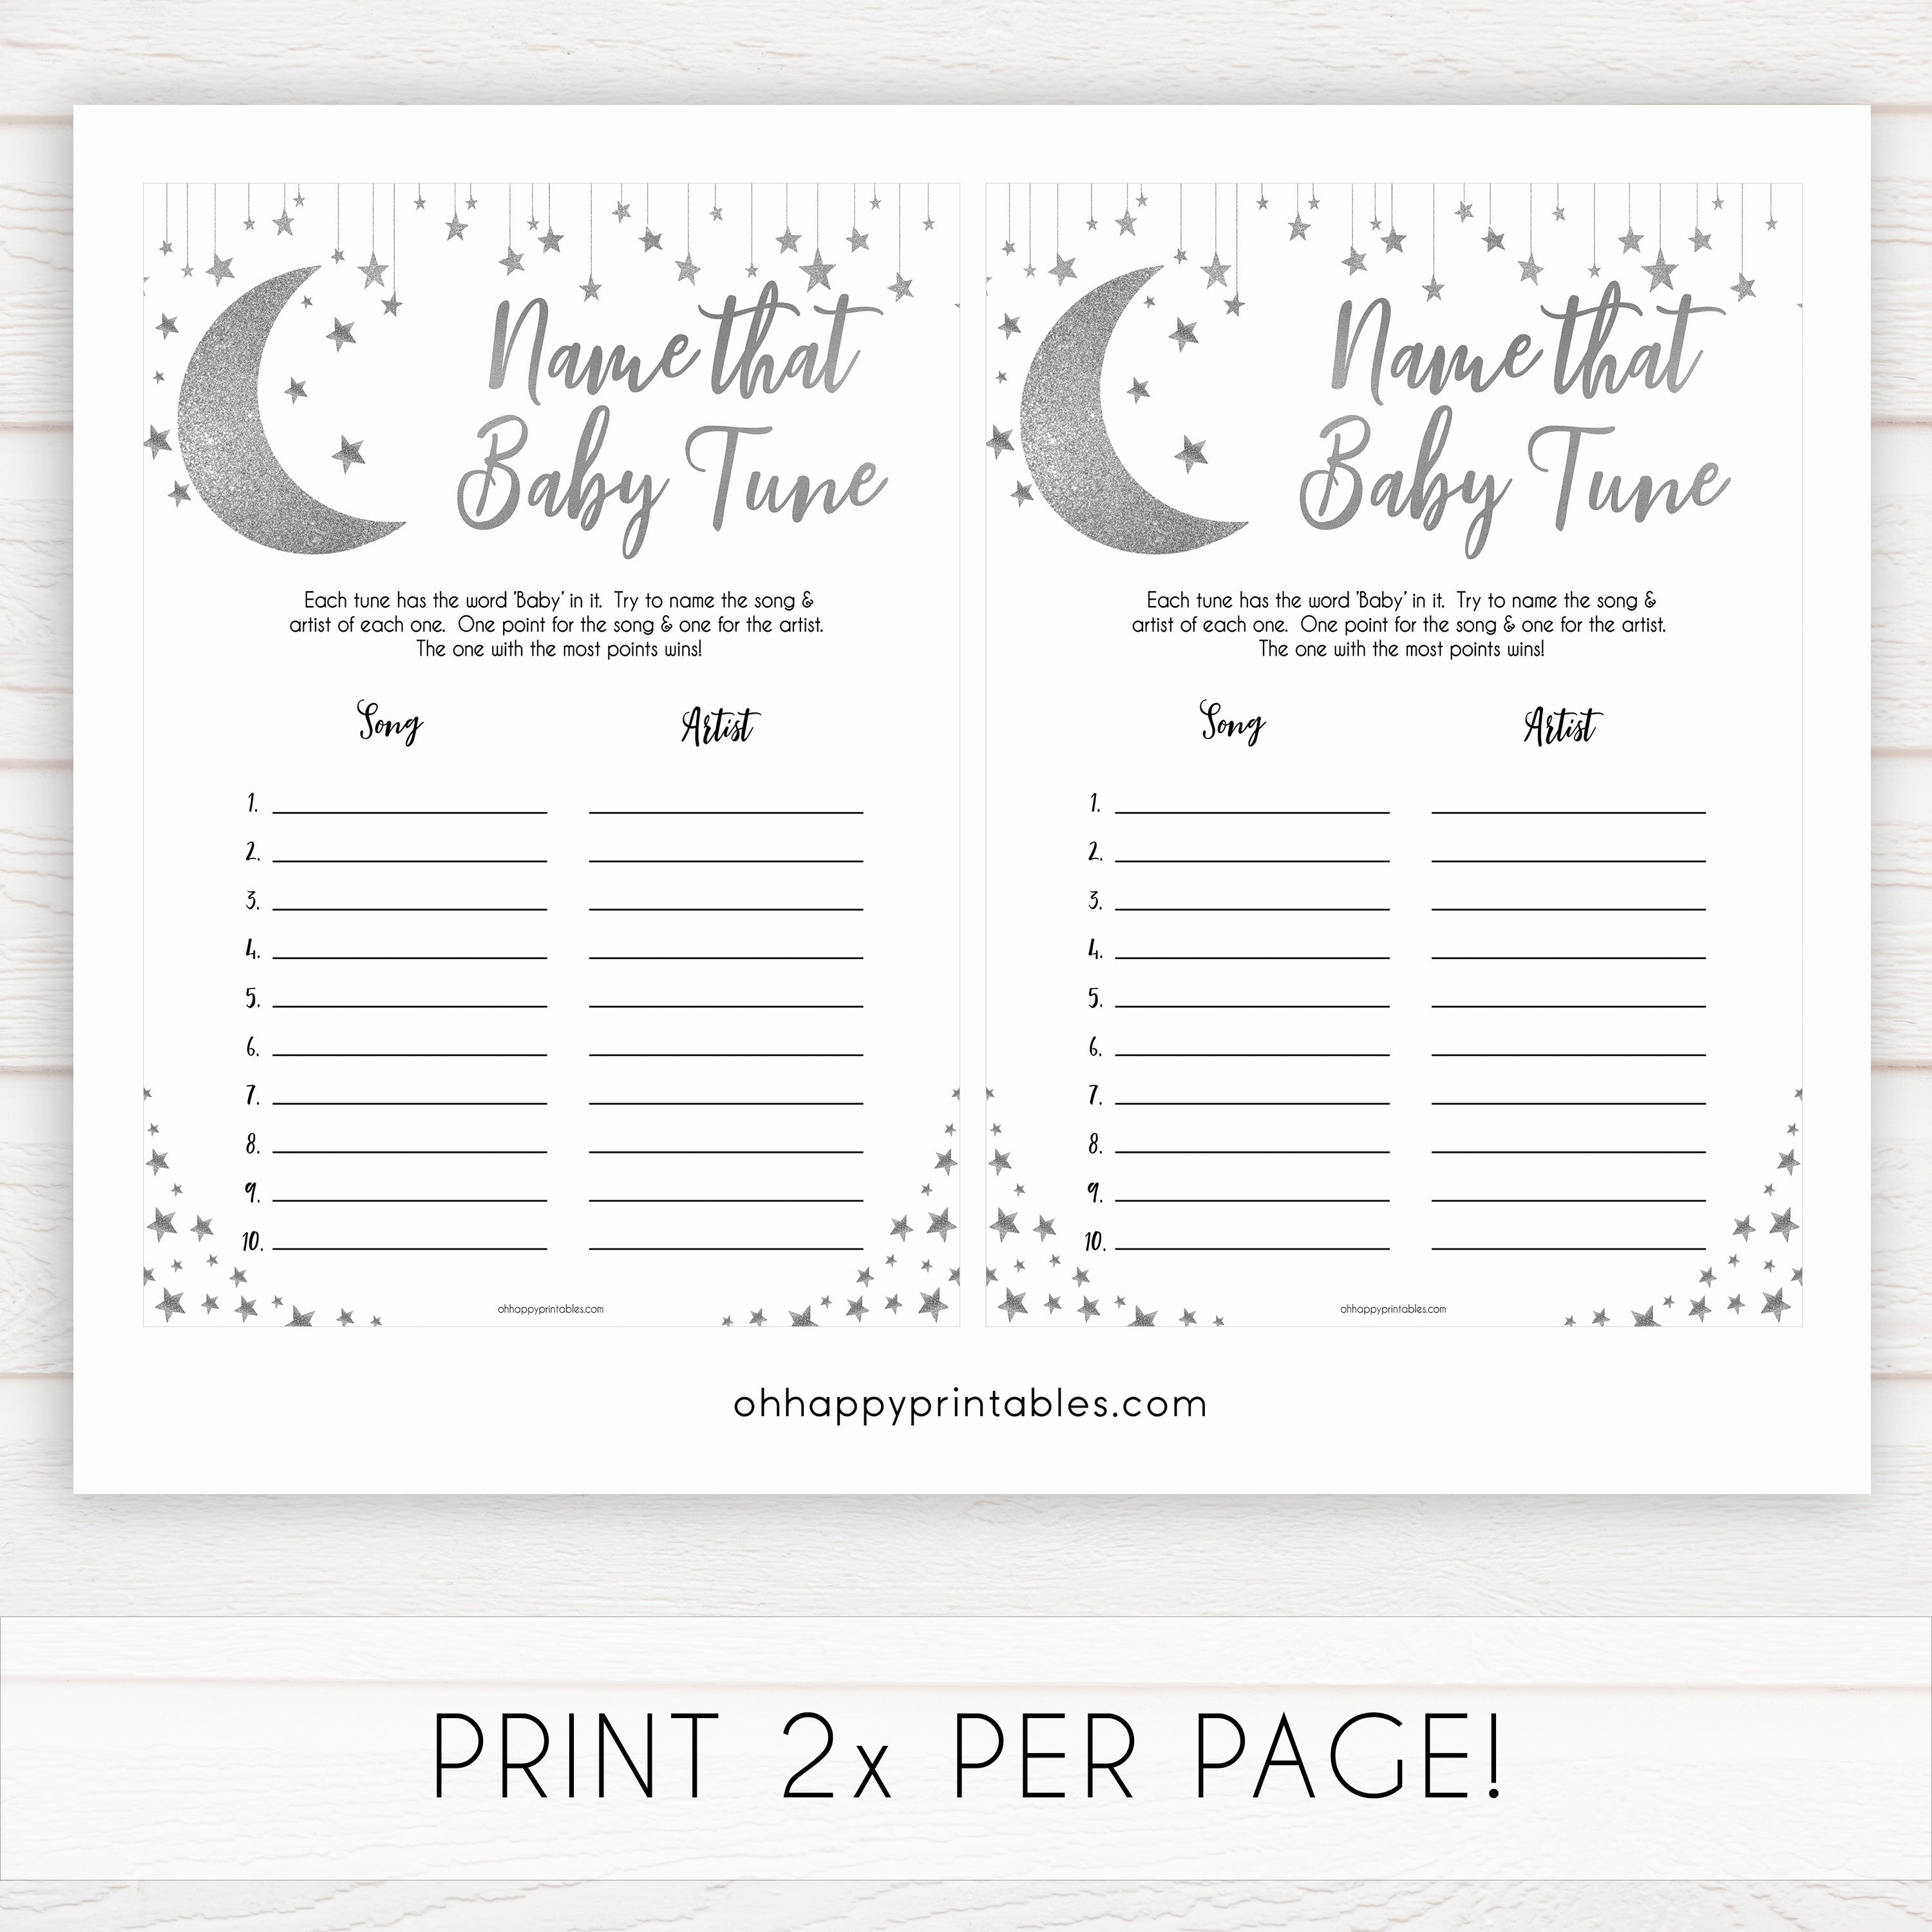 Silver little star, name that baby tune baby games, baby shower games, printable baby games, fun baby games, twinkle little star games, baby games, fun baby shower ideas, baby shower ideas